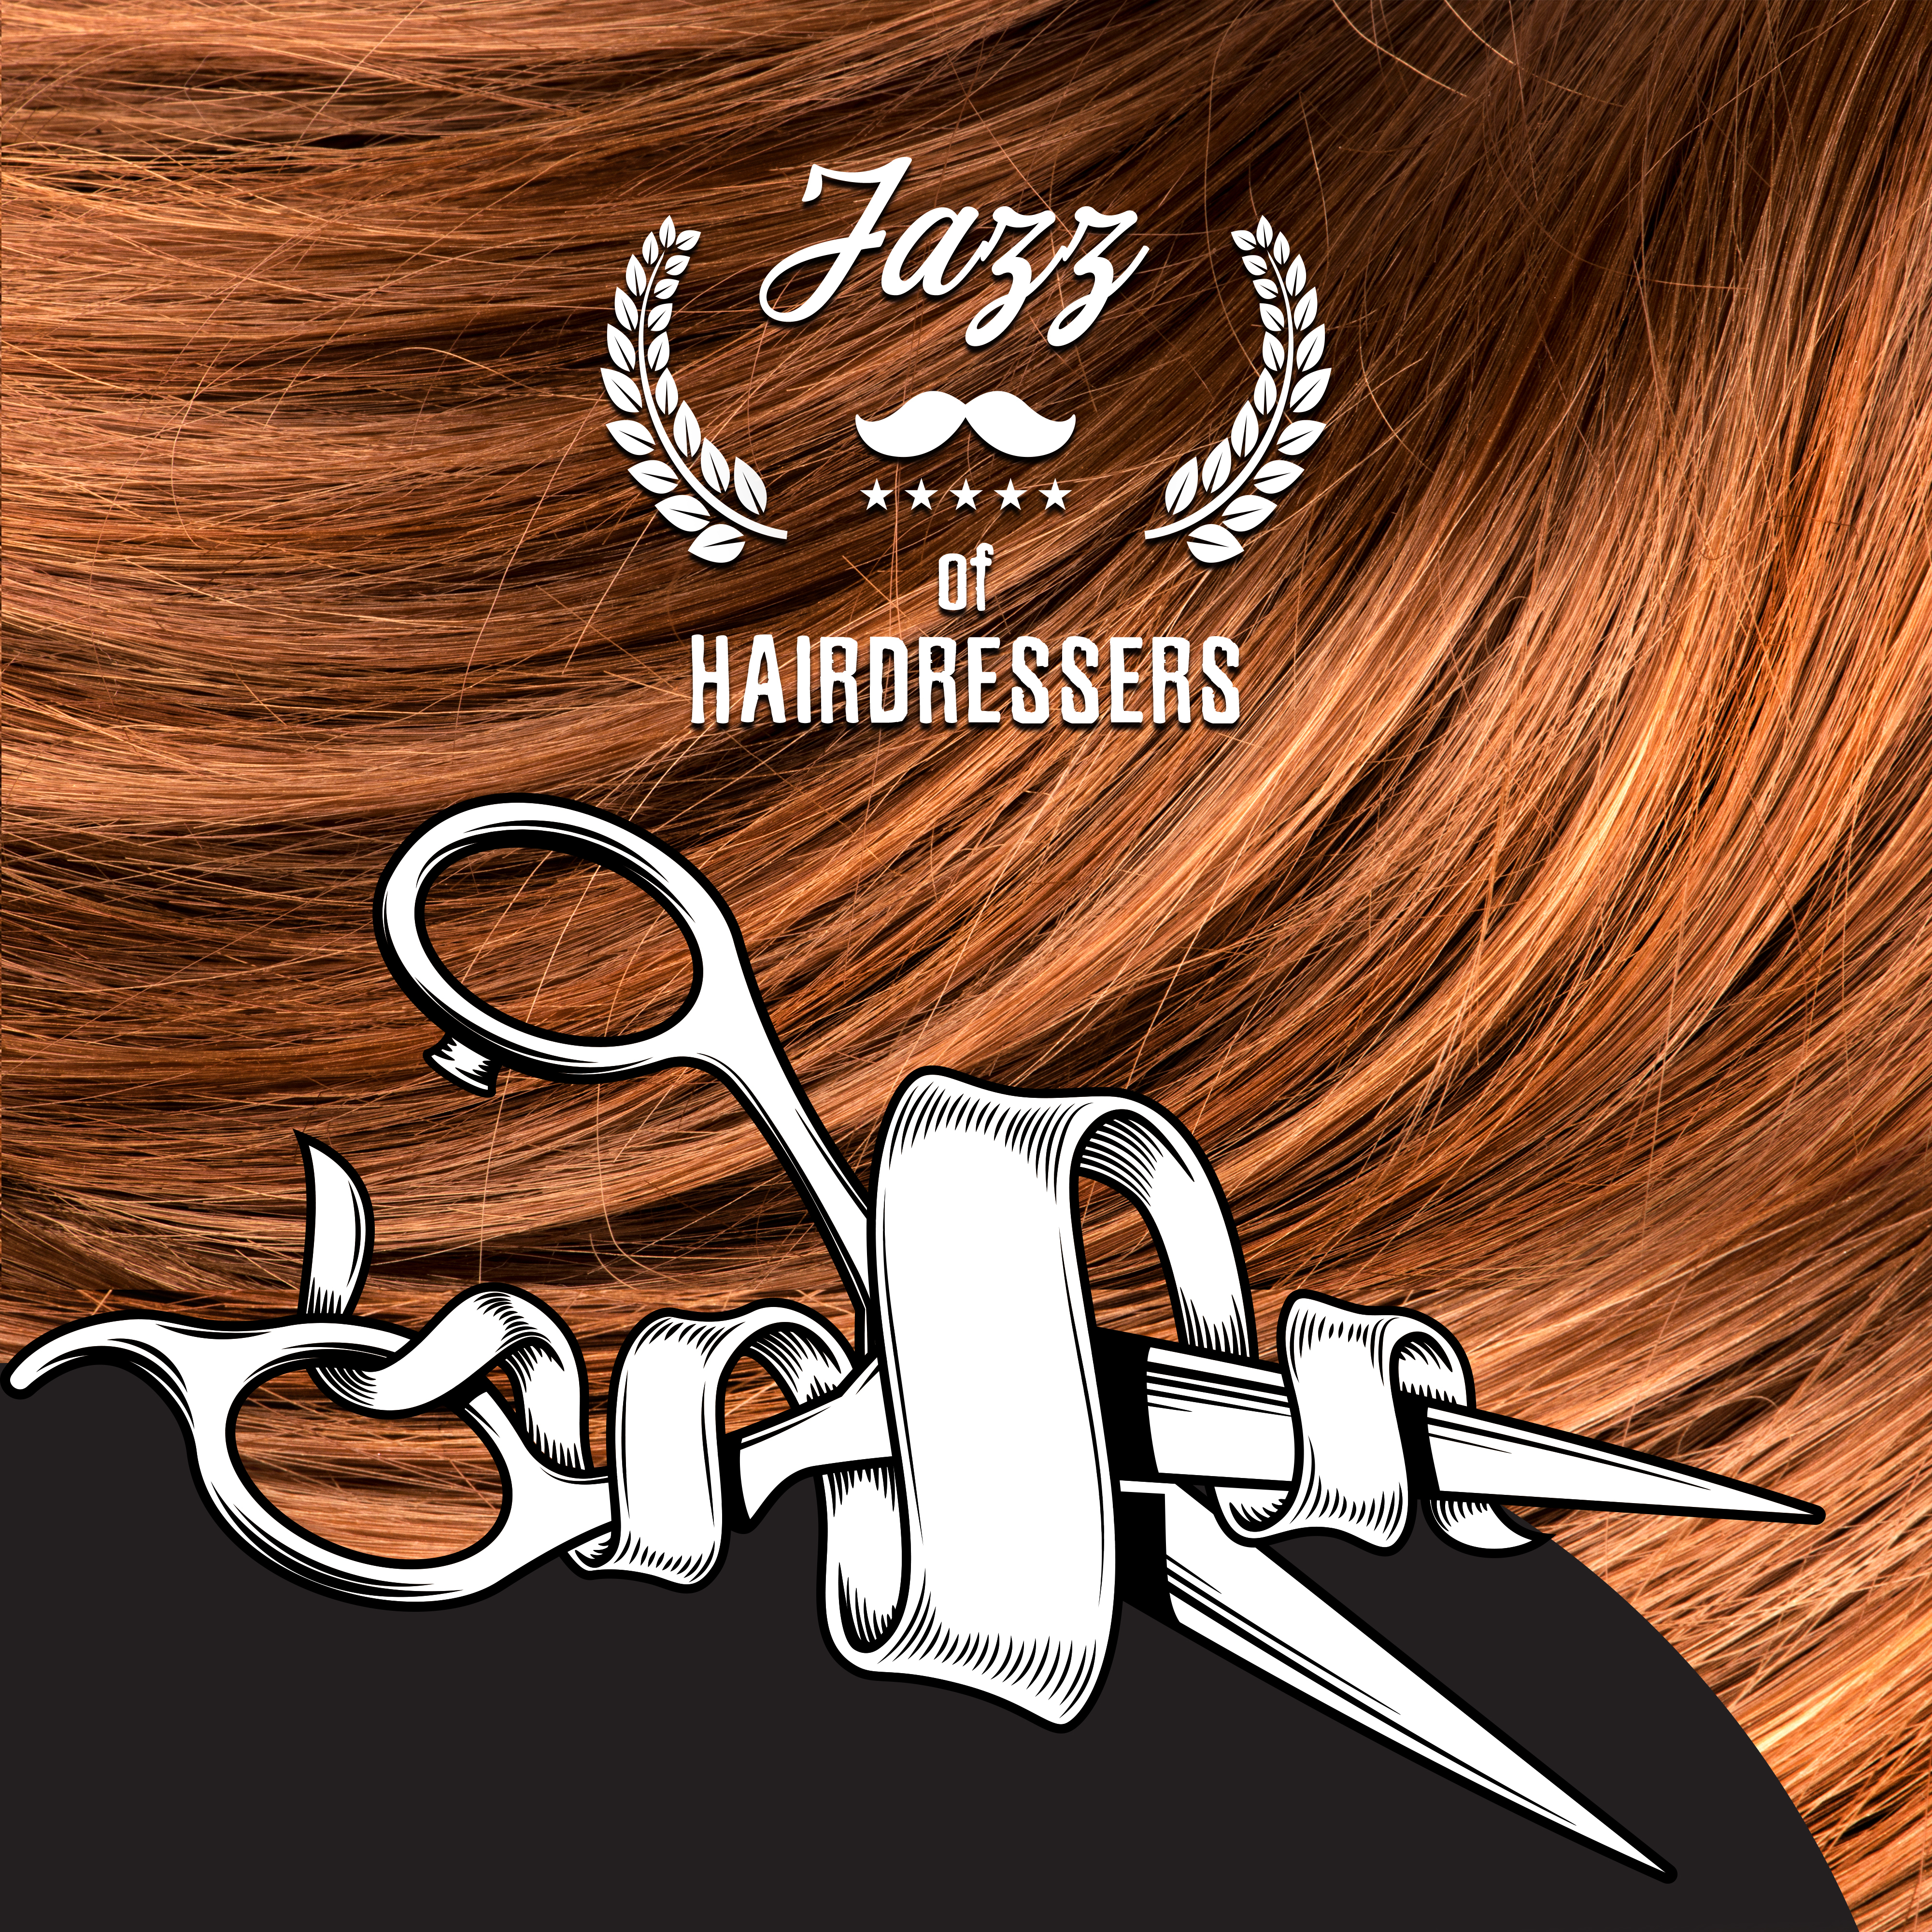 Jazz of Hairdressers – Music for Hairdressing Salons, Barber Shops and Beauty Salons